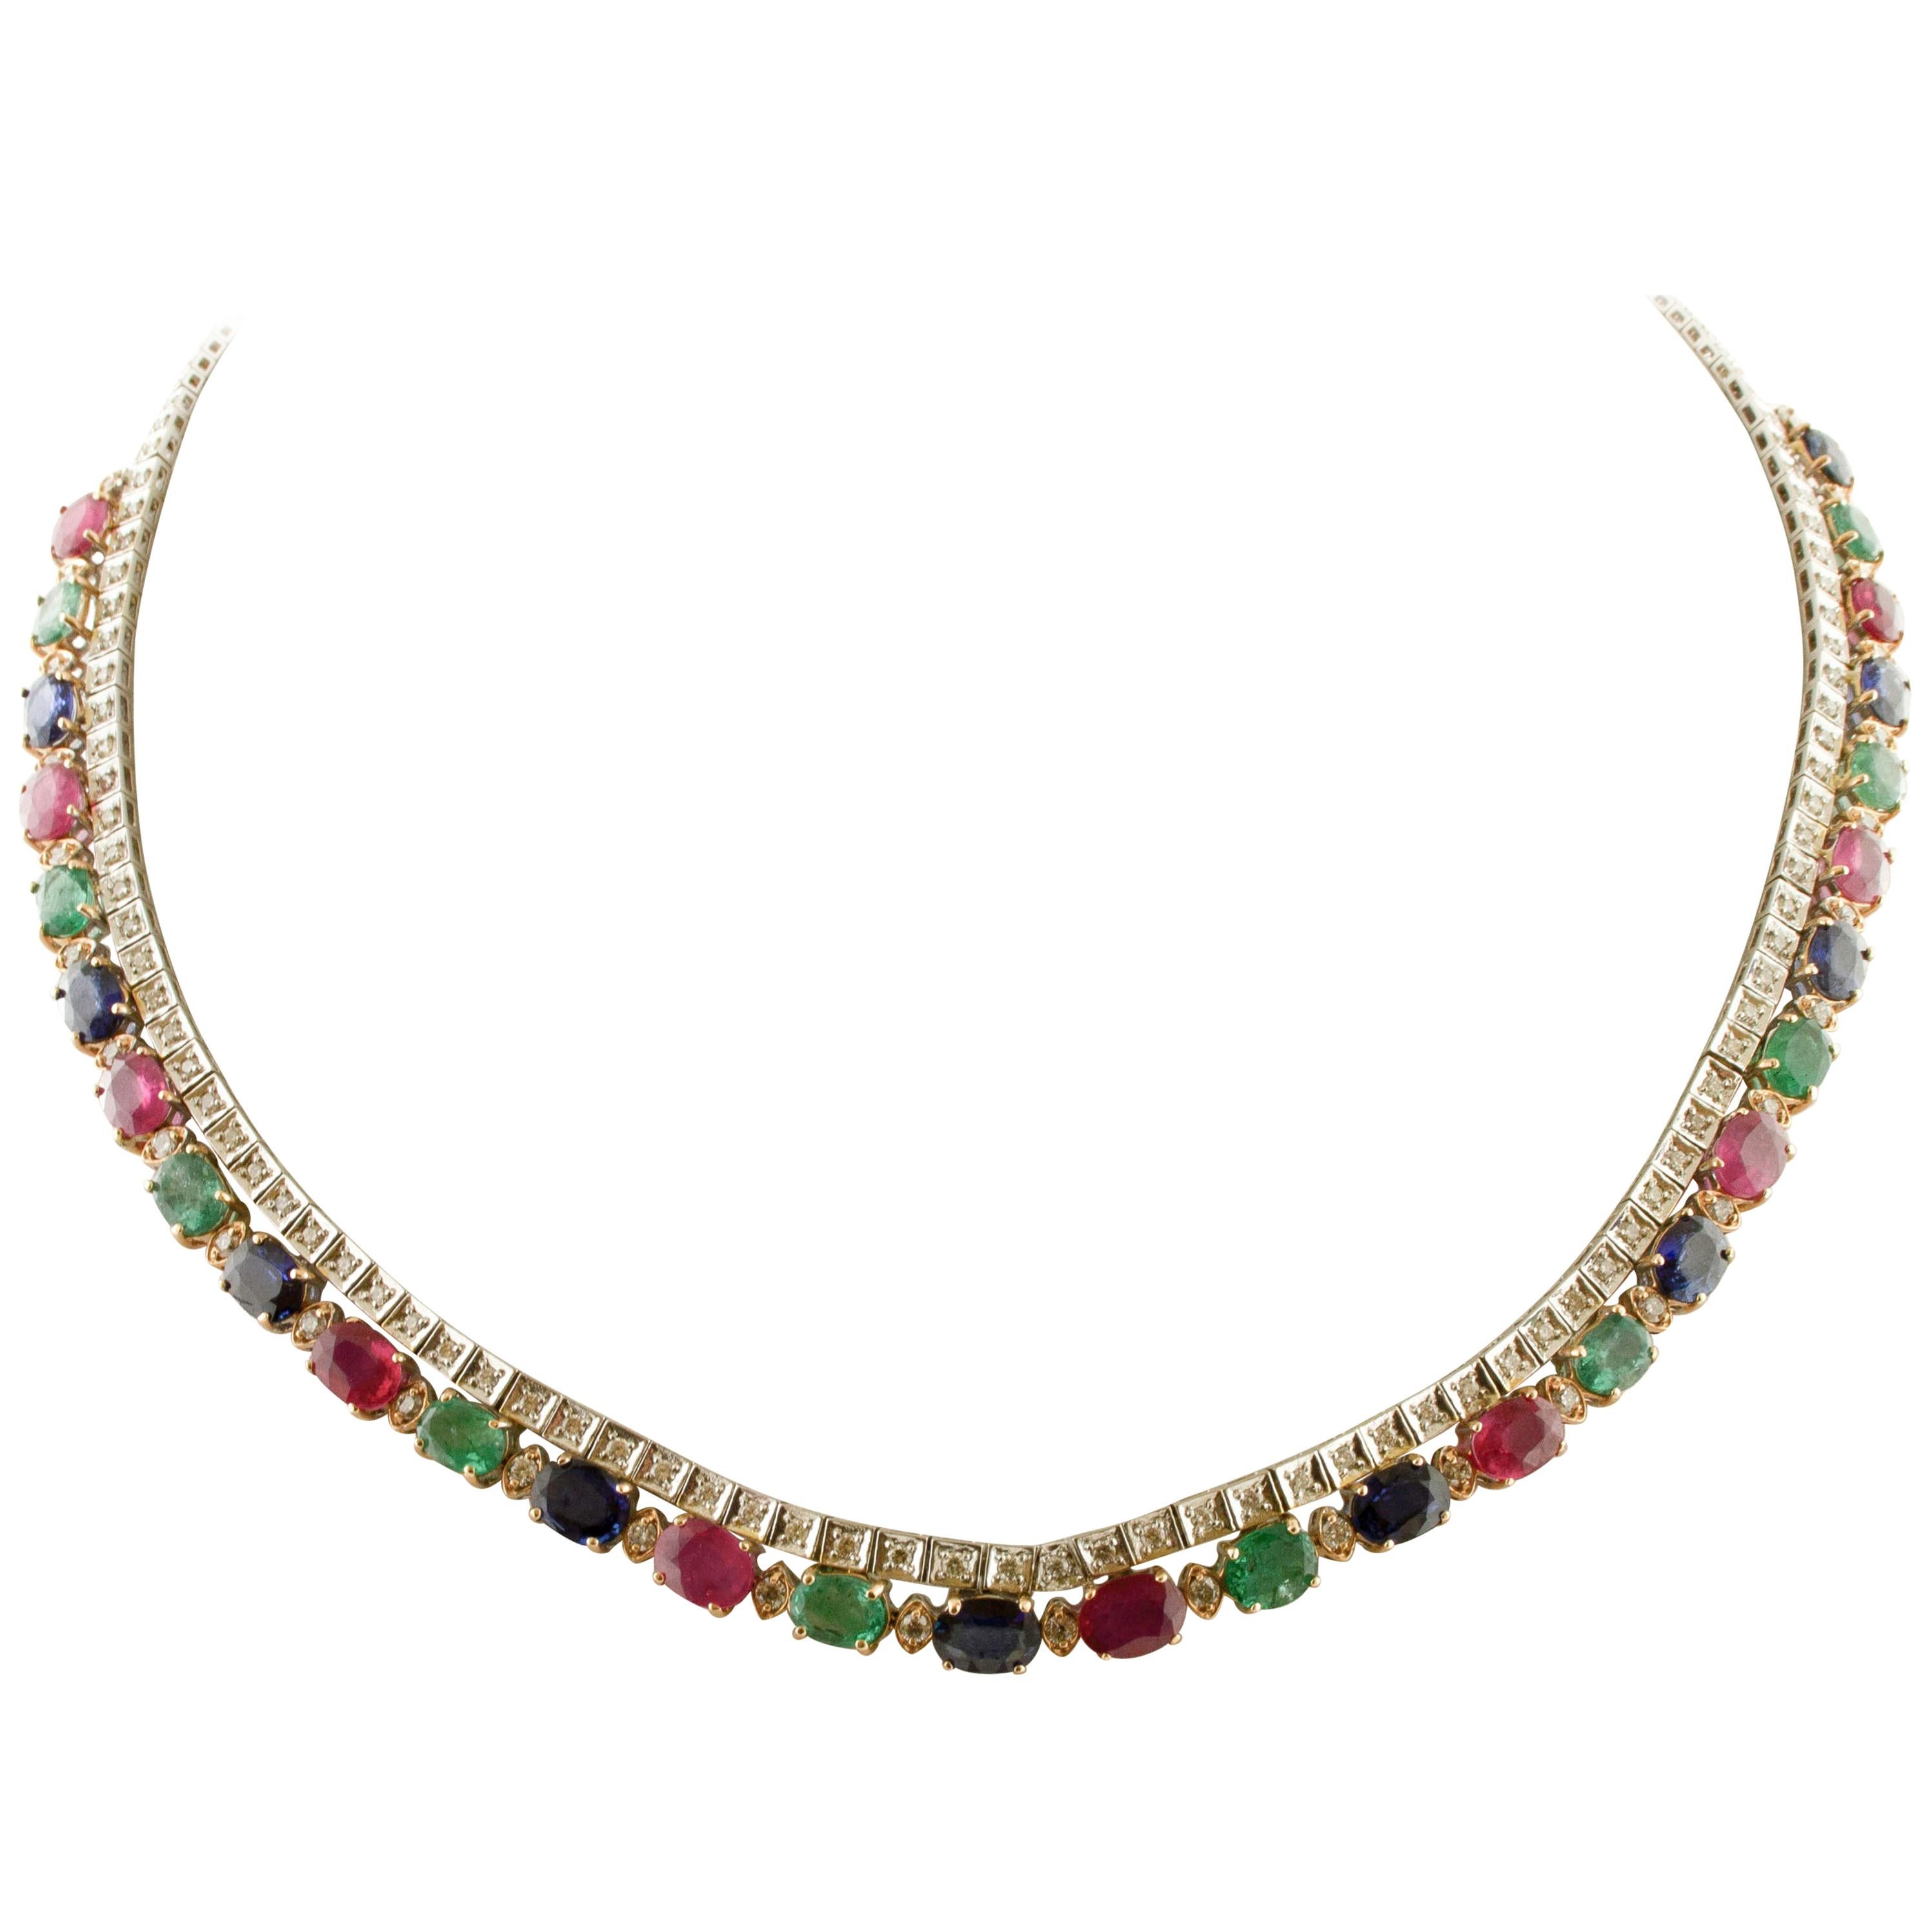 23.45ct Rubies Emeralds Blue Sapphires, Diamonds, 14K White Rose Gold Necklace